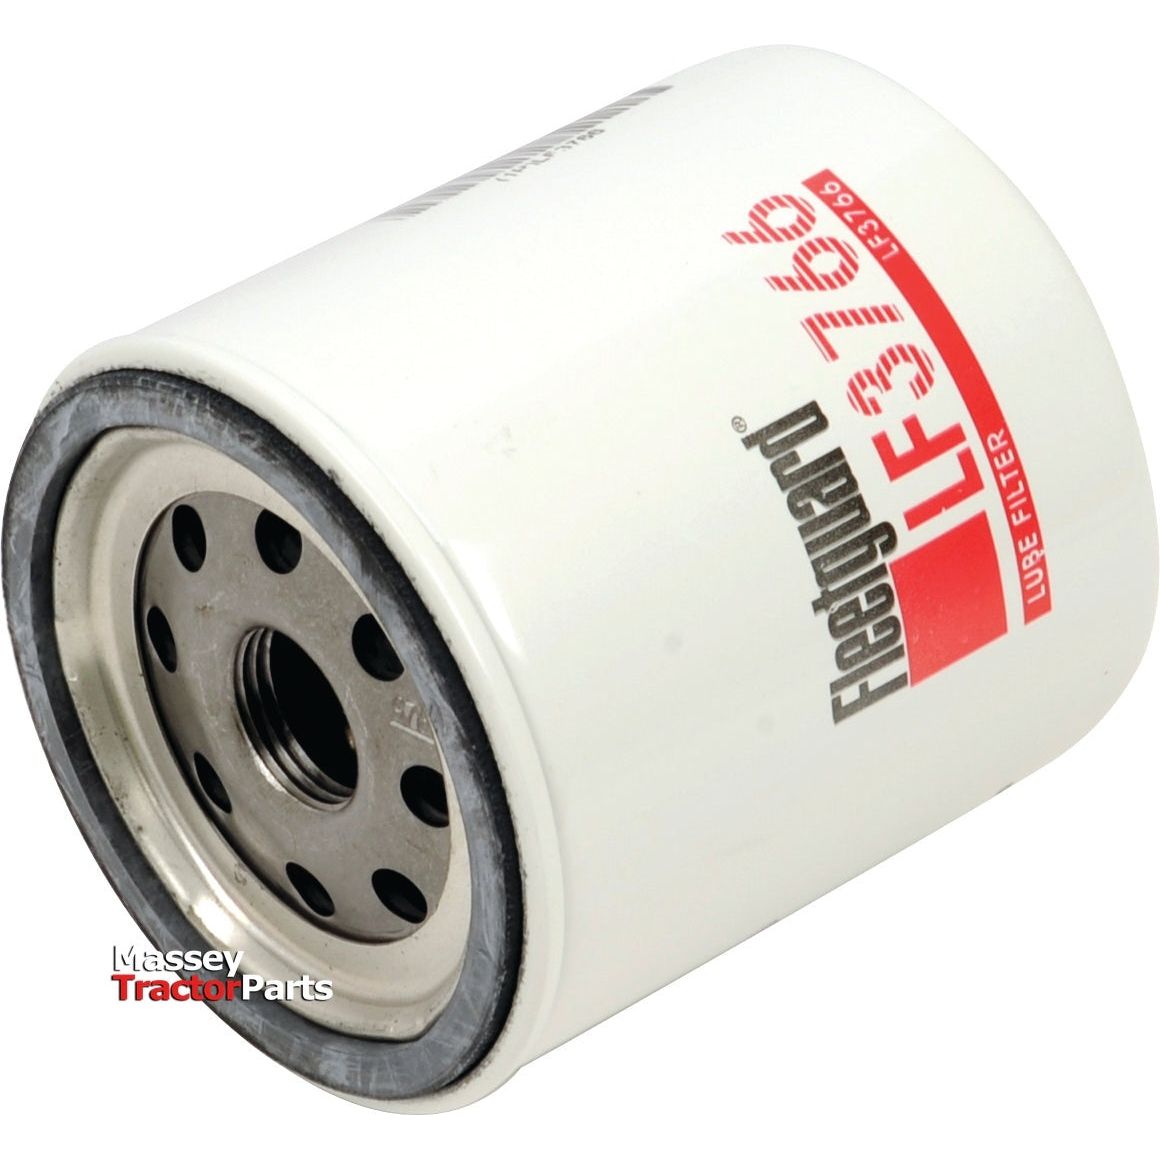 Oil Filter - Spin On - LF3766
 - S.109442 - Farming Parts